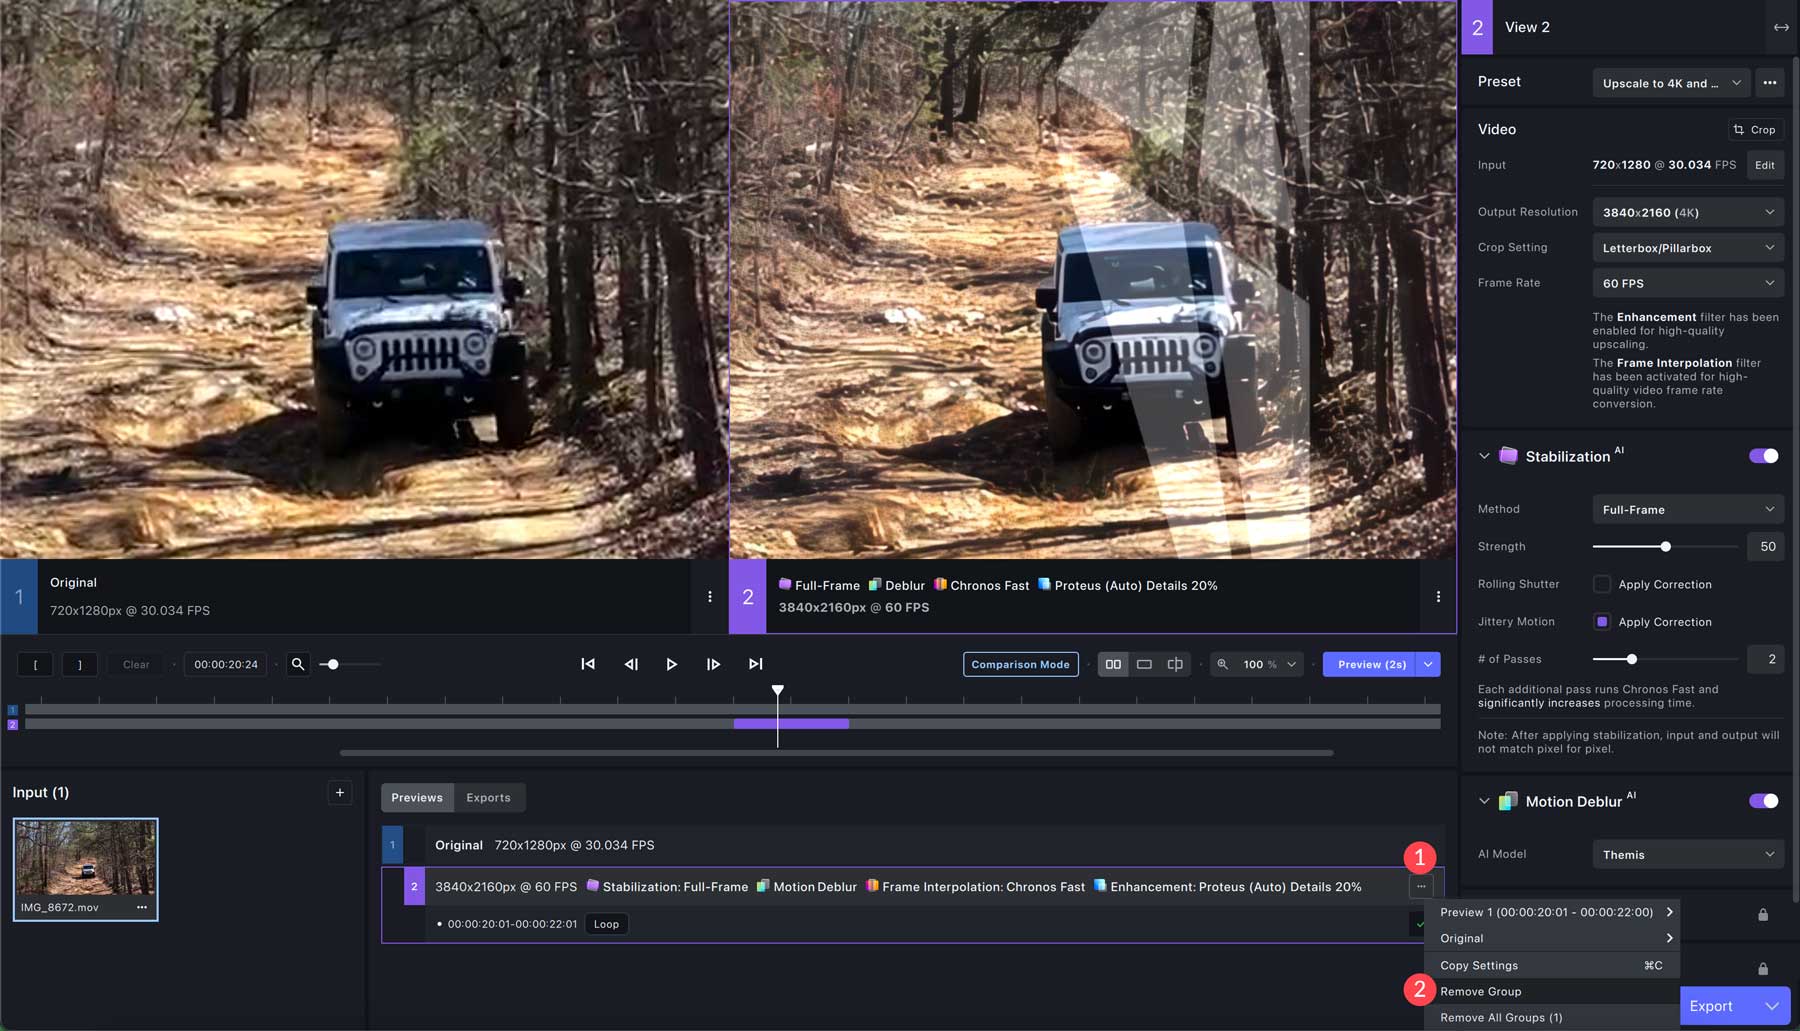 upscale videos with AI